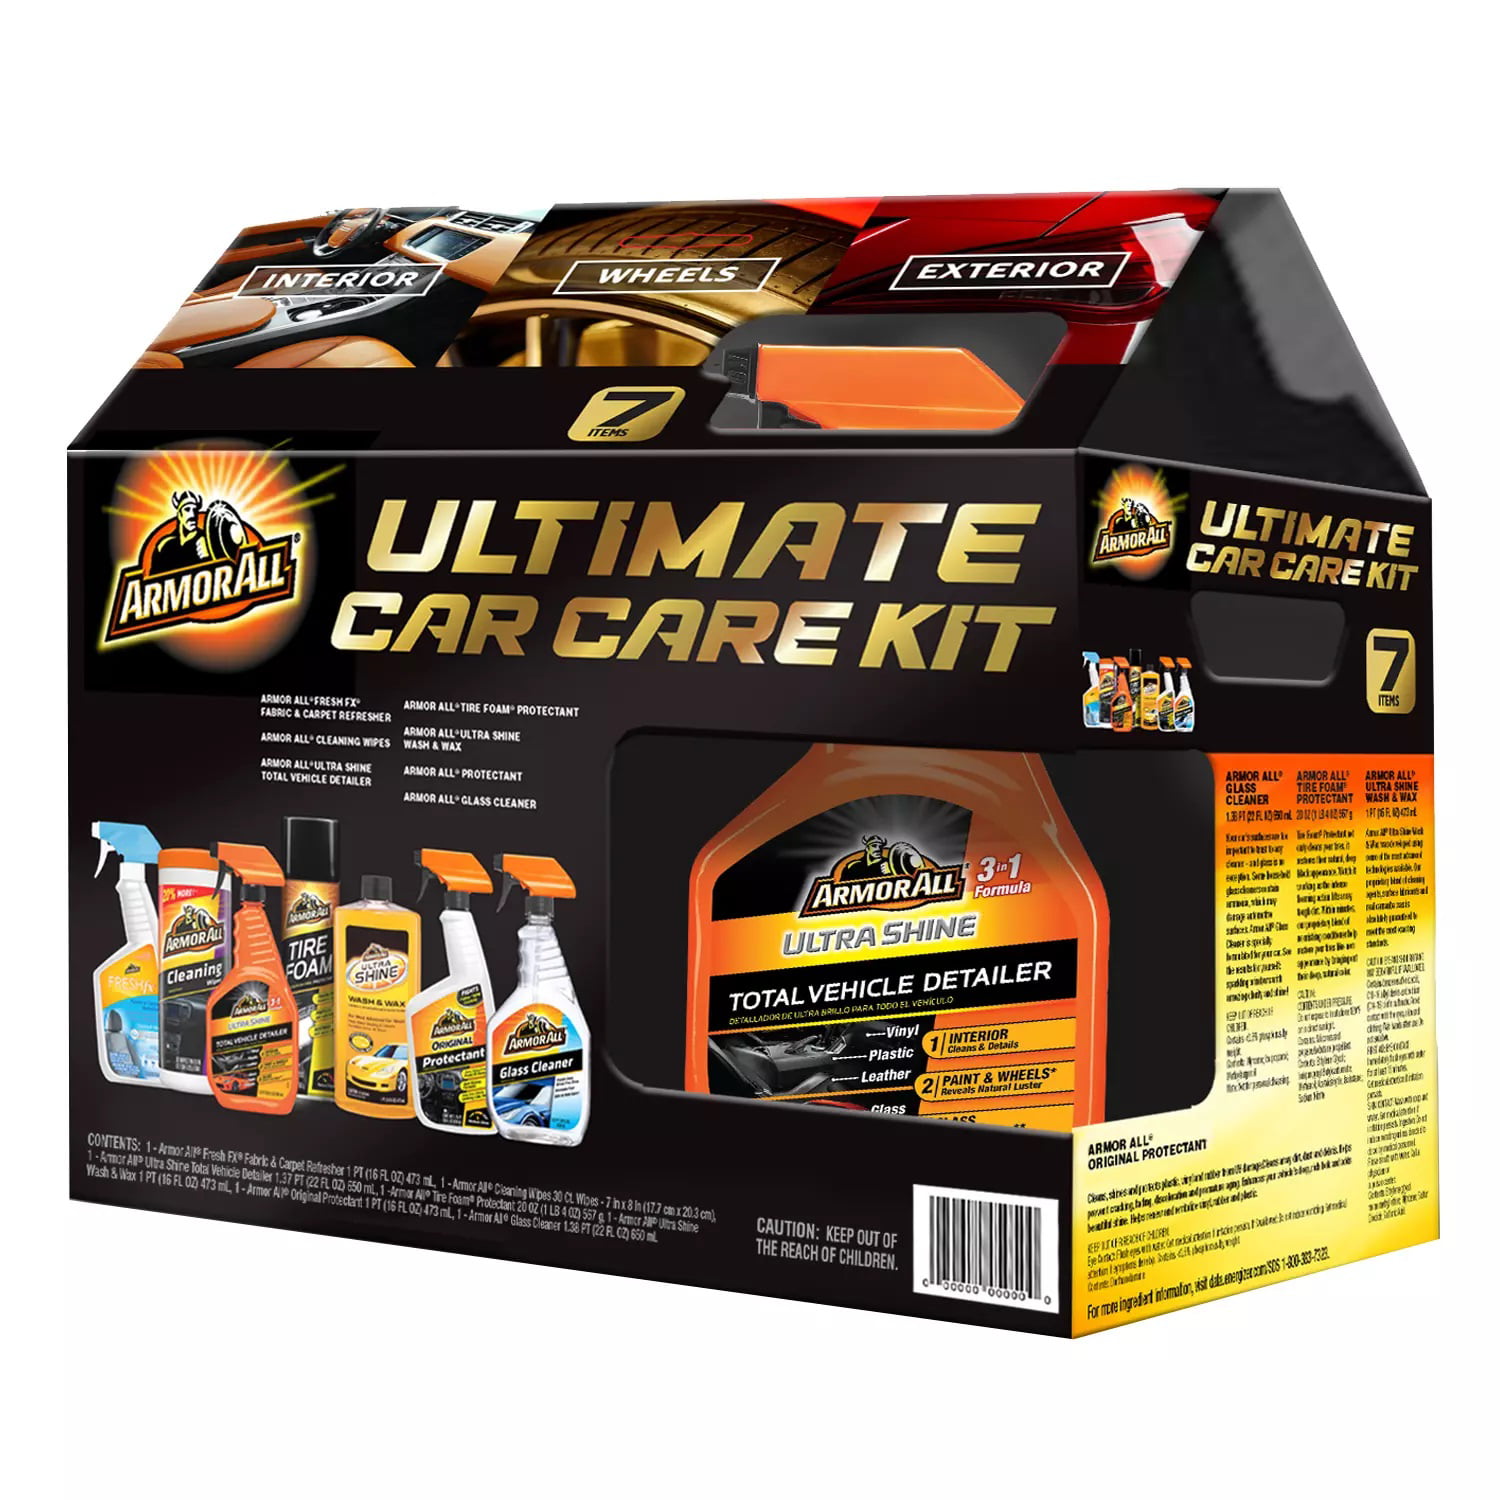 10-Pc Armor All Ultimate Auto Cleaners Car Care Set $22.90 + Free